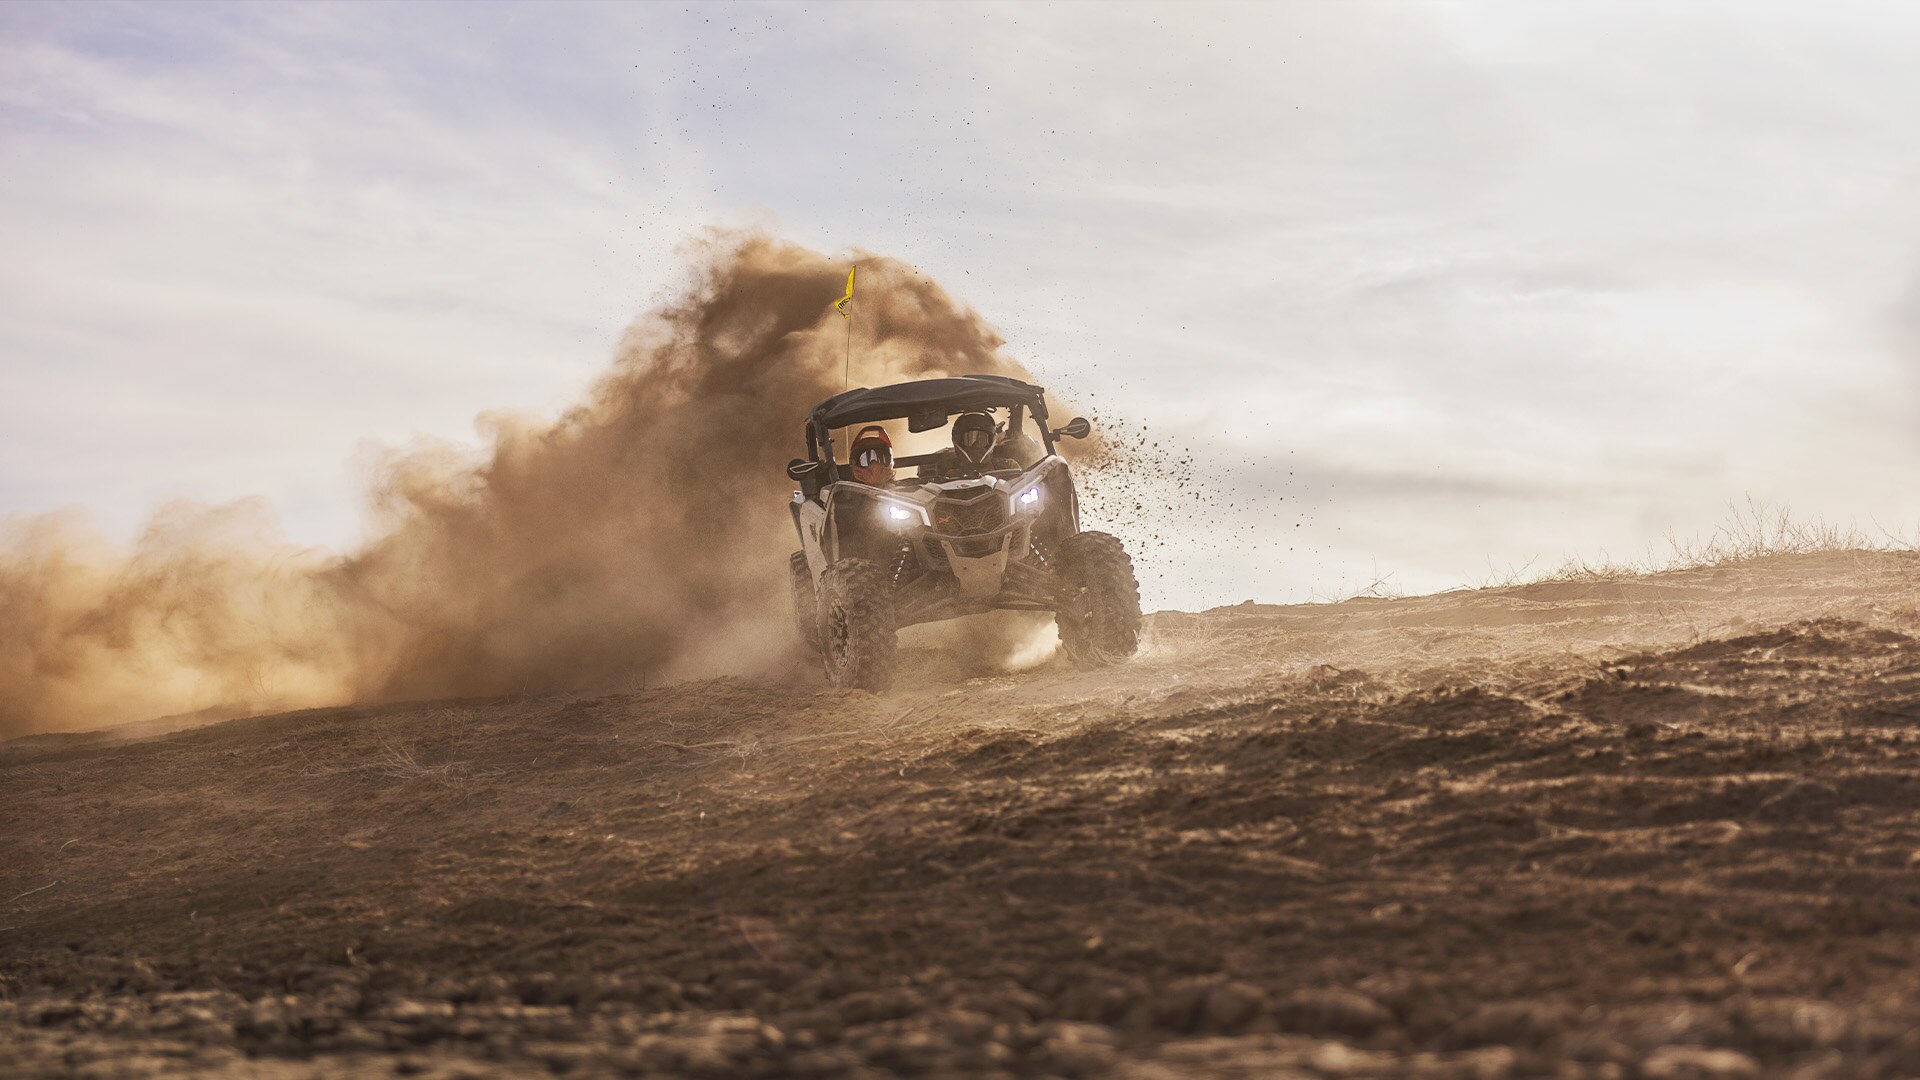 Can-Am SxS vehicle riding in the dirt at high speed